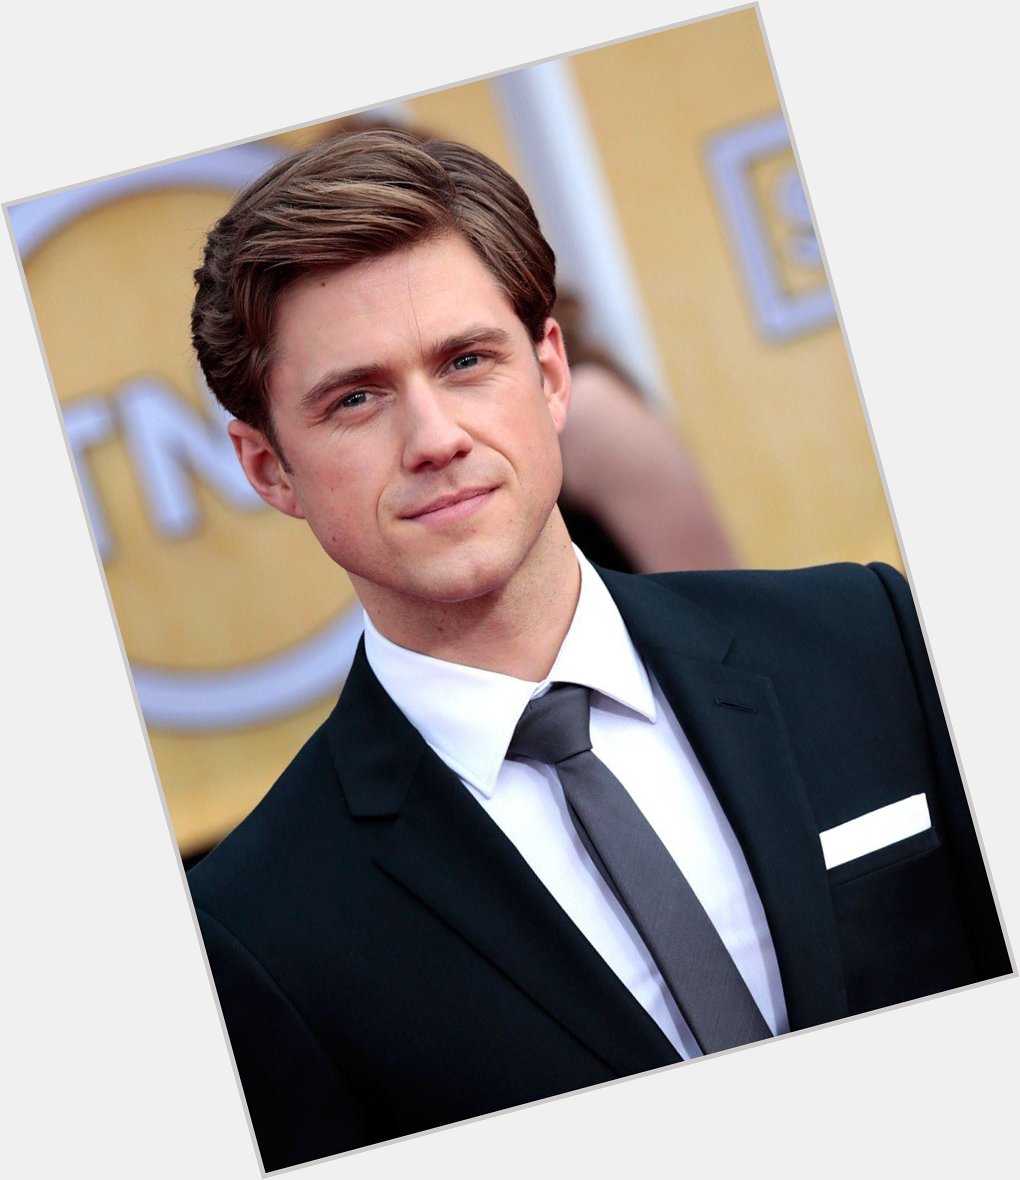 A BIG HAPPY BIRTHDAY TO AARON TVEIT!!!

remessage and favorite to send him some love   